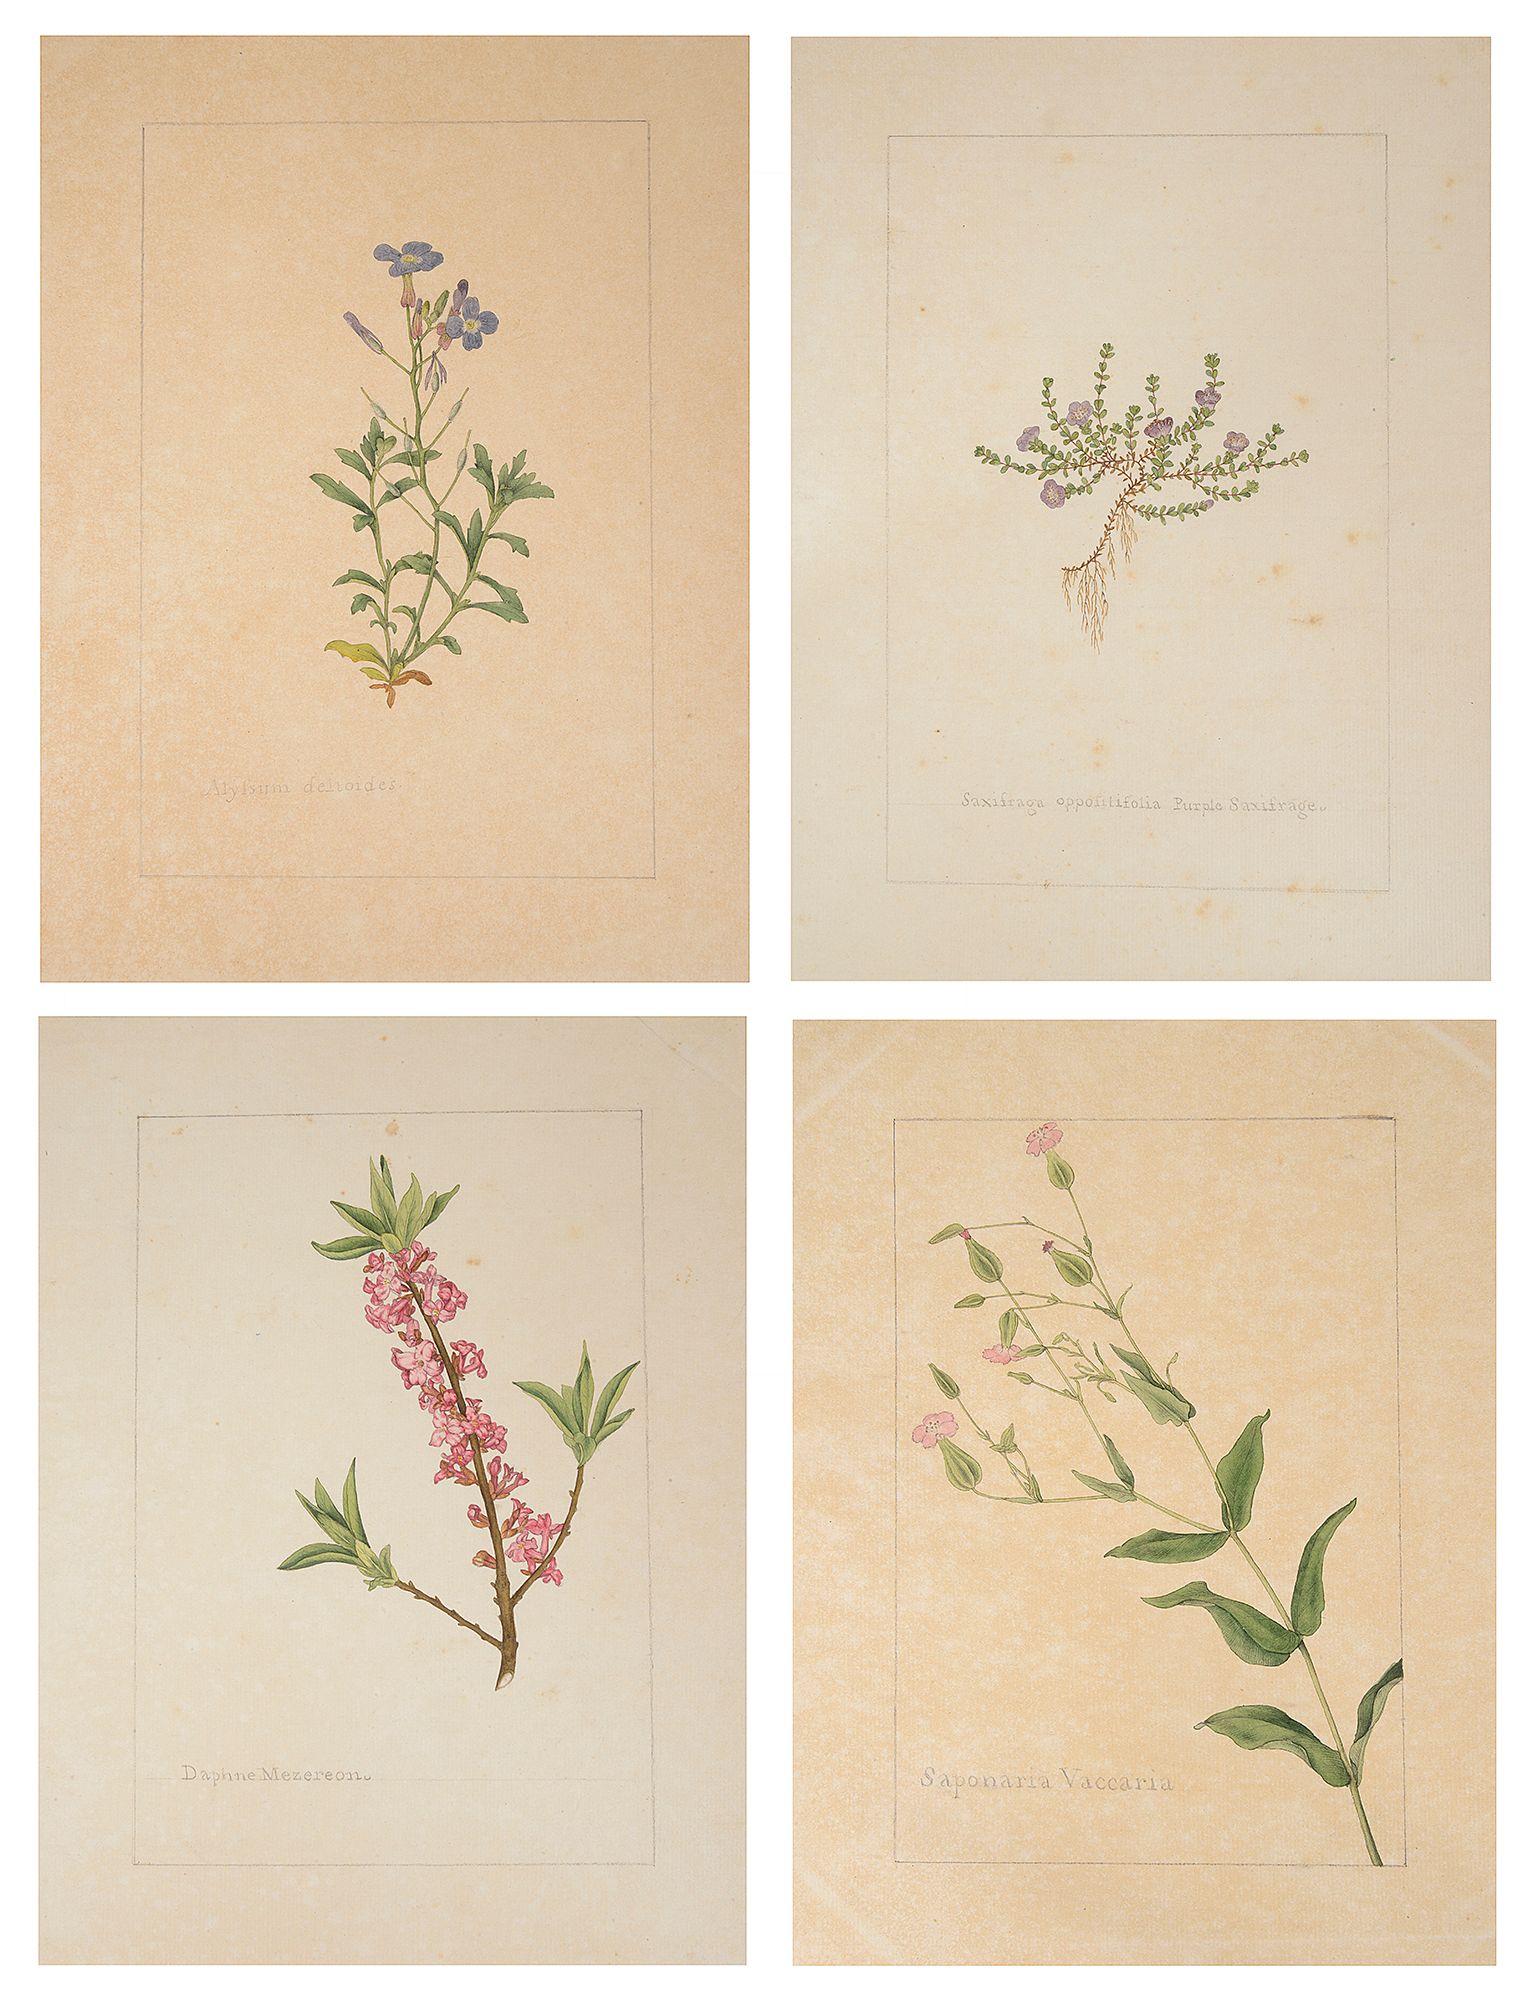 Four botanical studies of purple and pink flowers from the collection of William Curtis (1746-1799)